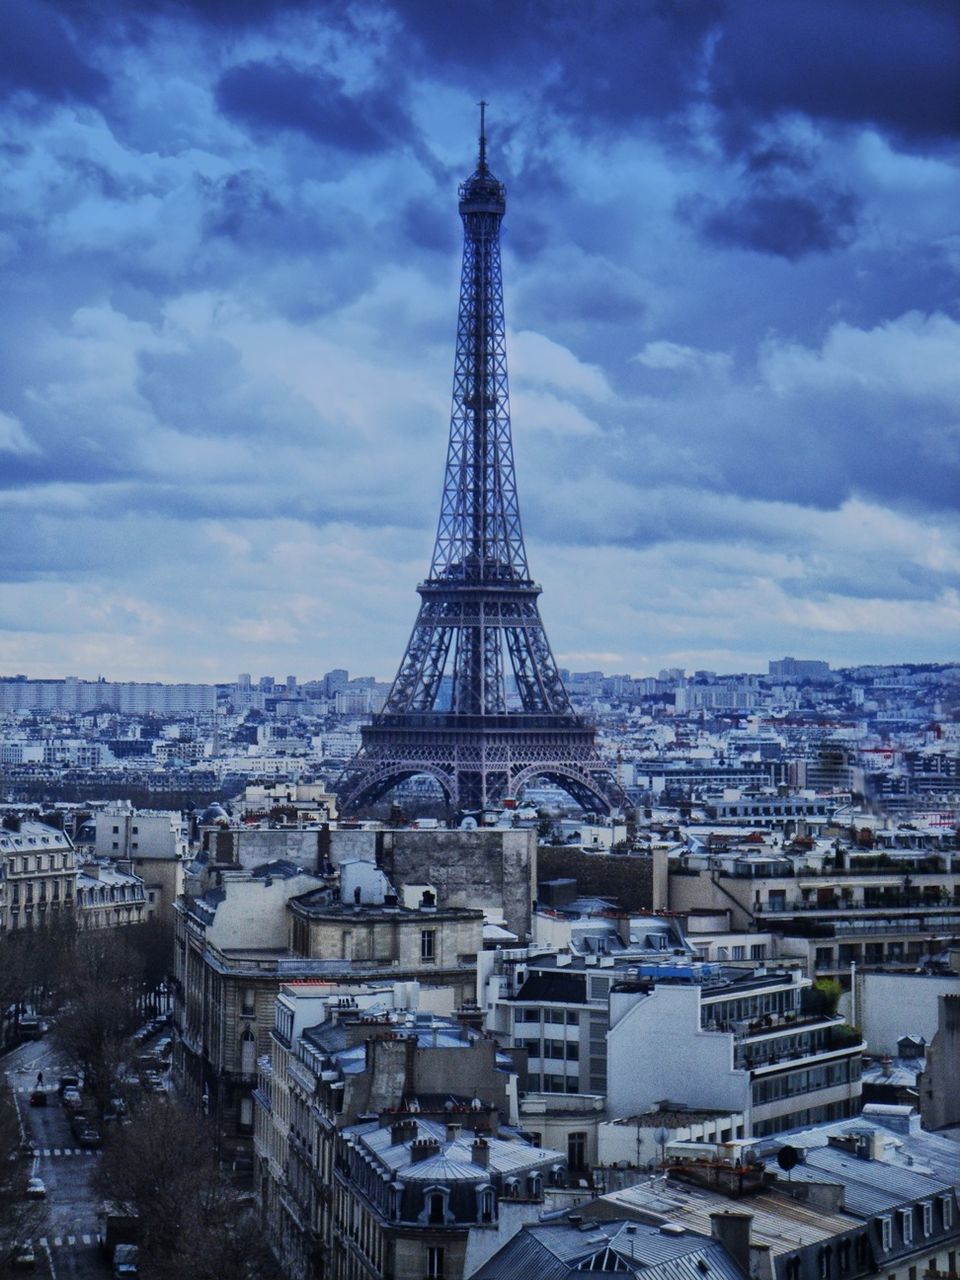 Eiffel tower and surrounding cityscape